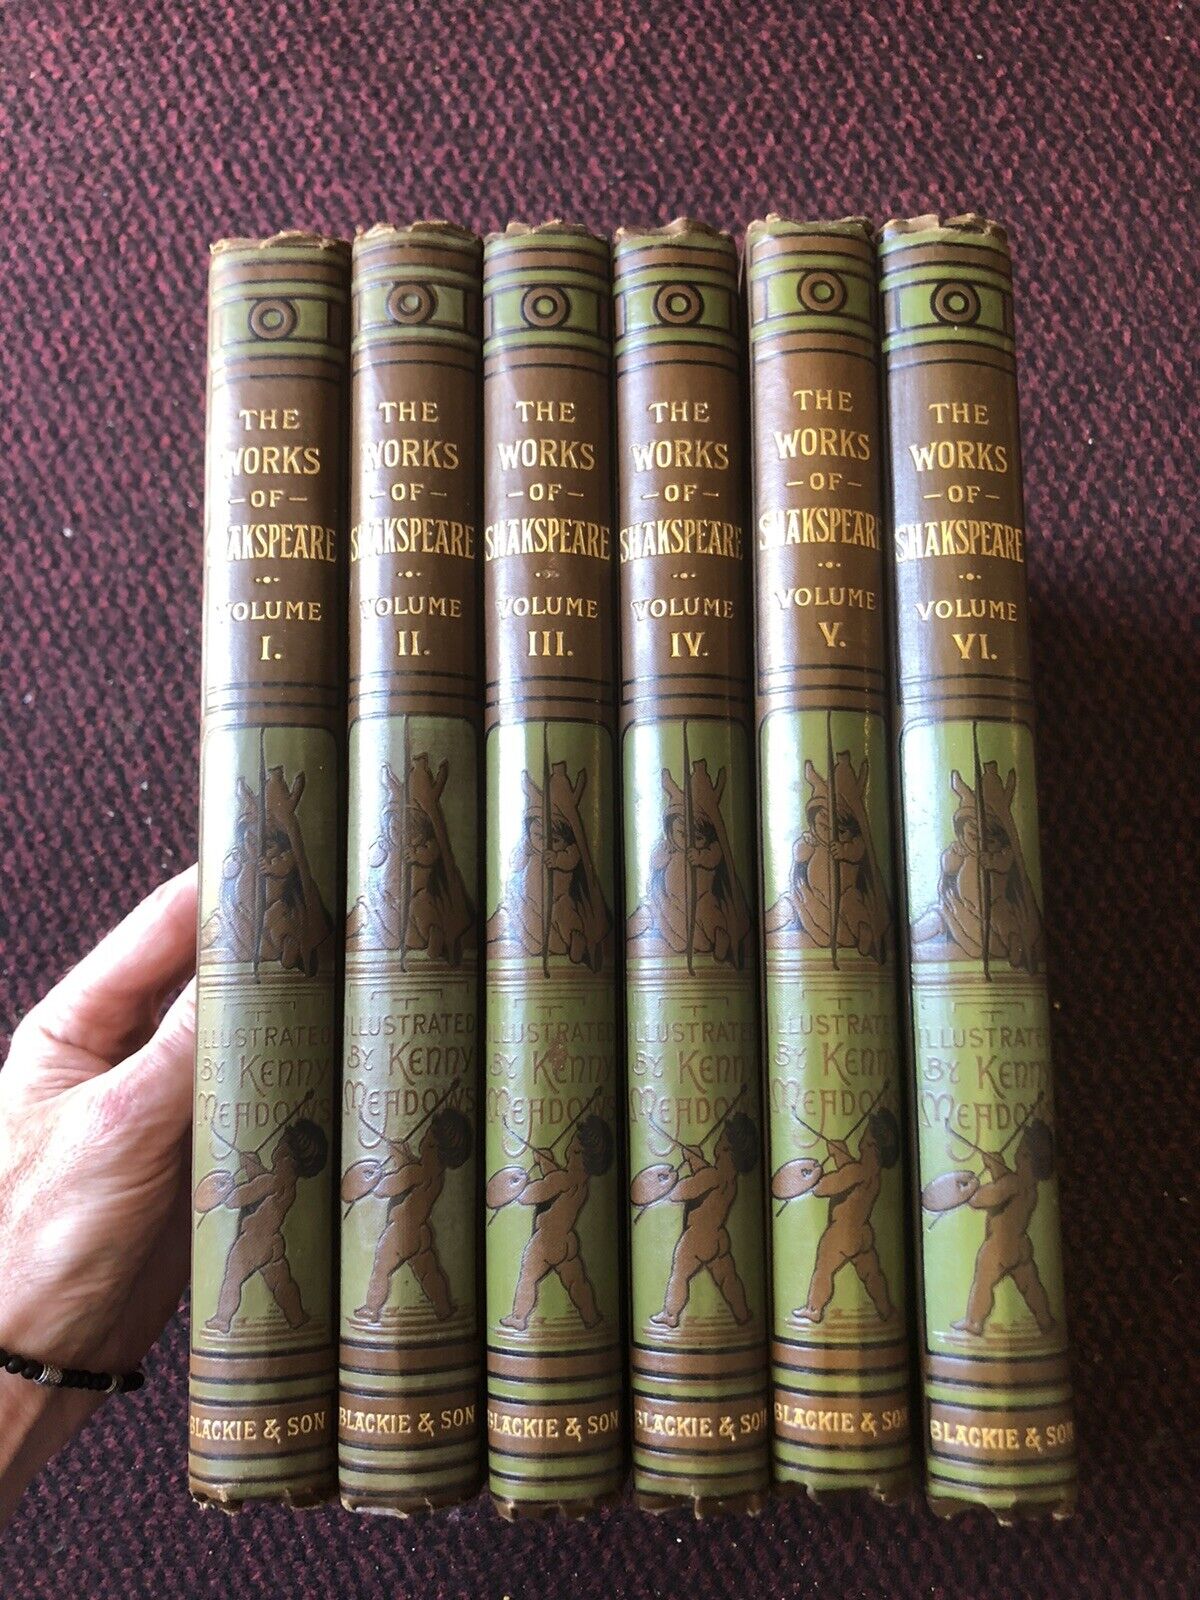 1886 STUNNING SET : The Works of Shakespeare (6 Volumes) Illus by Kenny Meadows